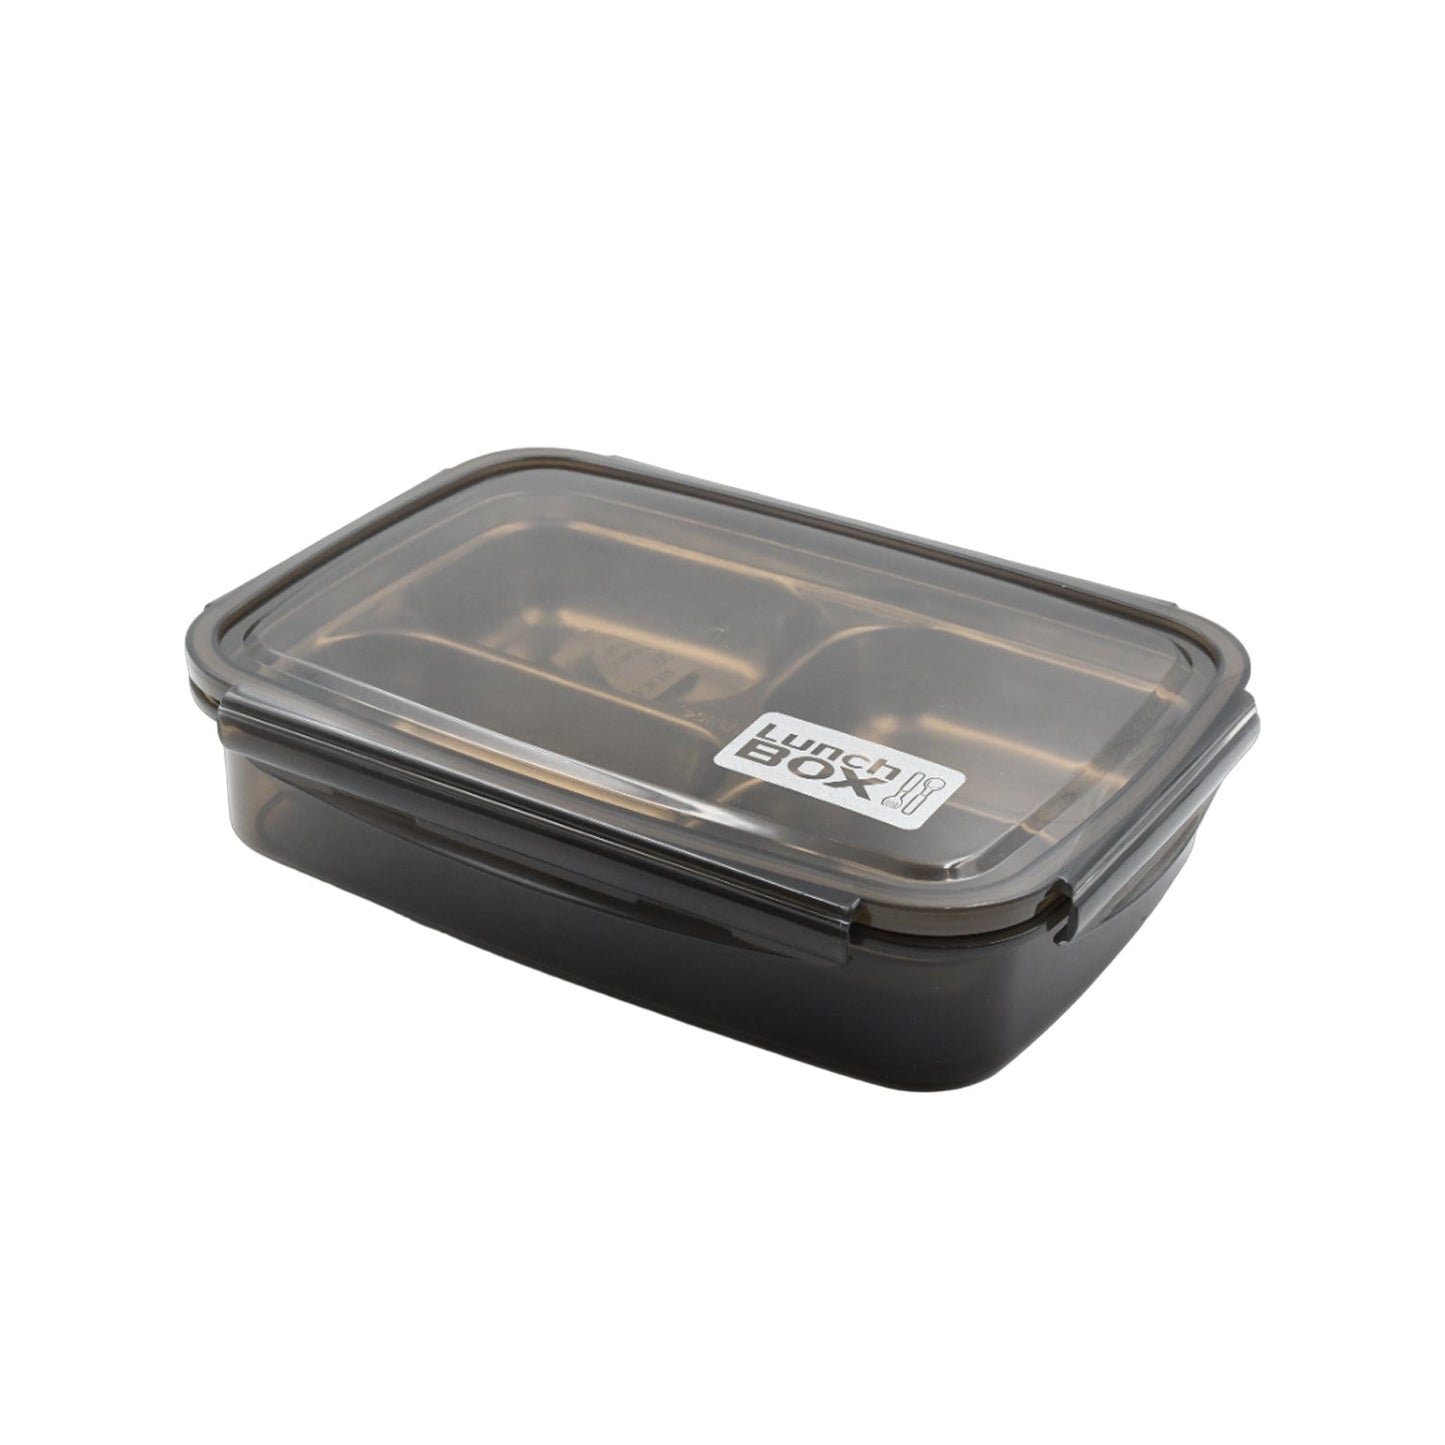 2979A Black Transparent 4 Compartment Lunch Box for Kids and adults, Stainless Steel Lunch Box with 4 Compartments For Office, Travel, School, Home